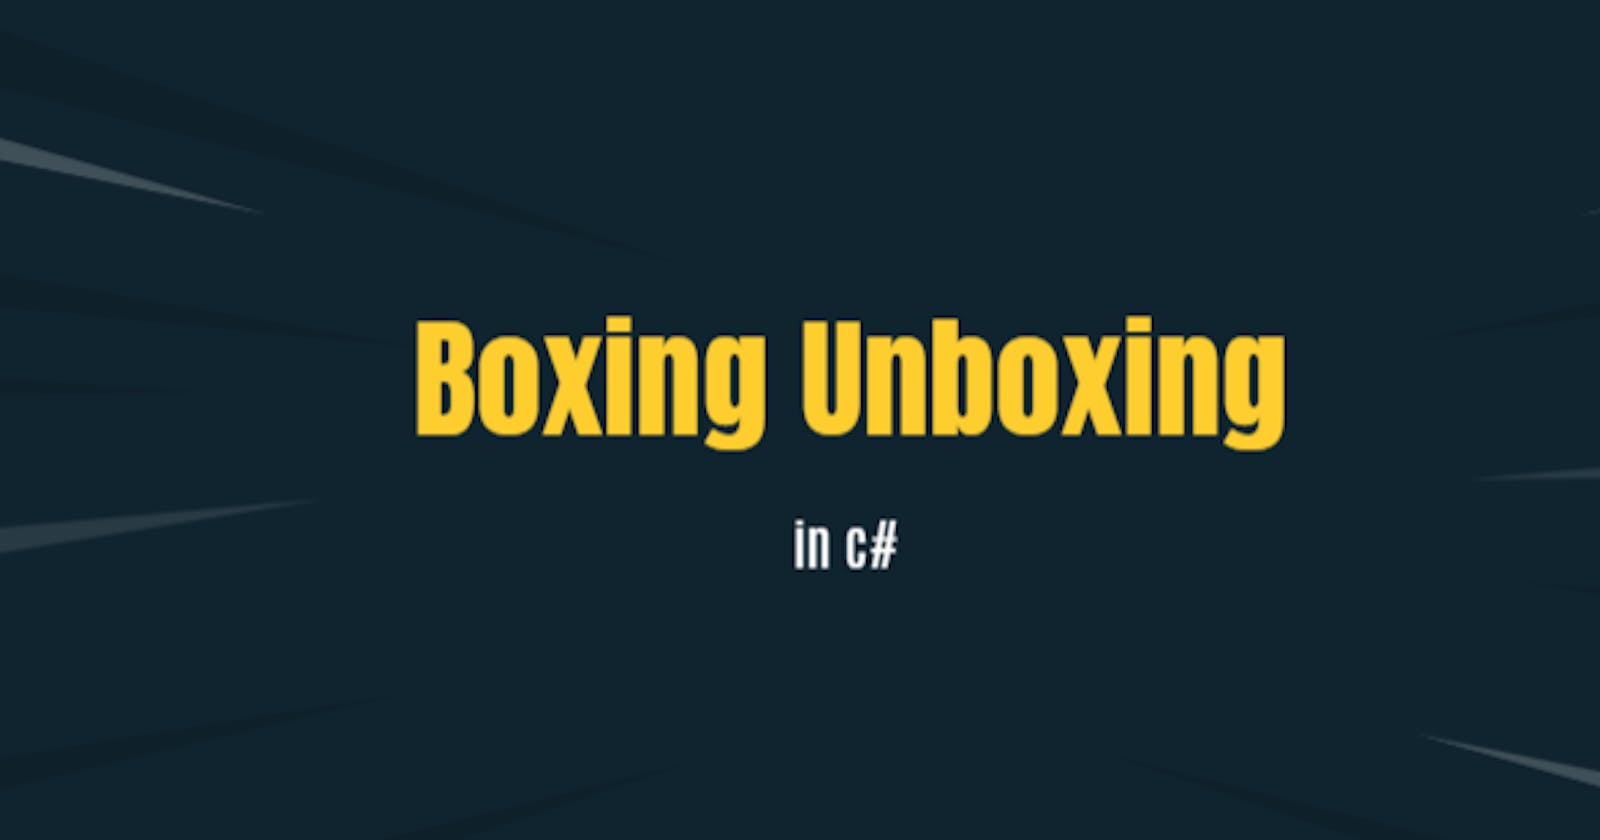 Boxing and Unboxing in C#